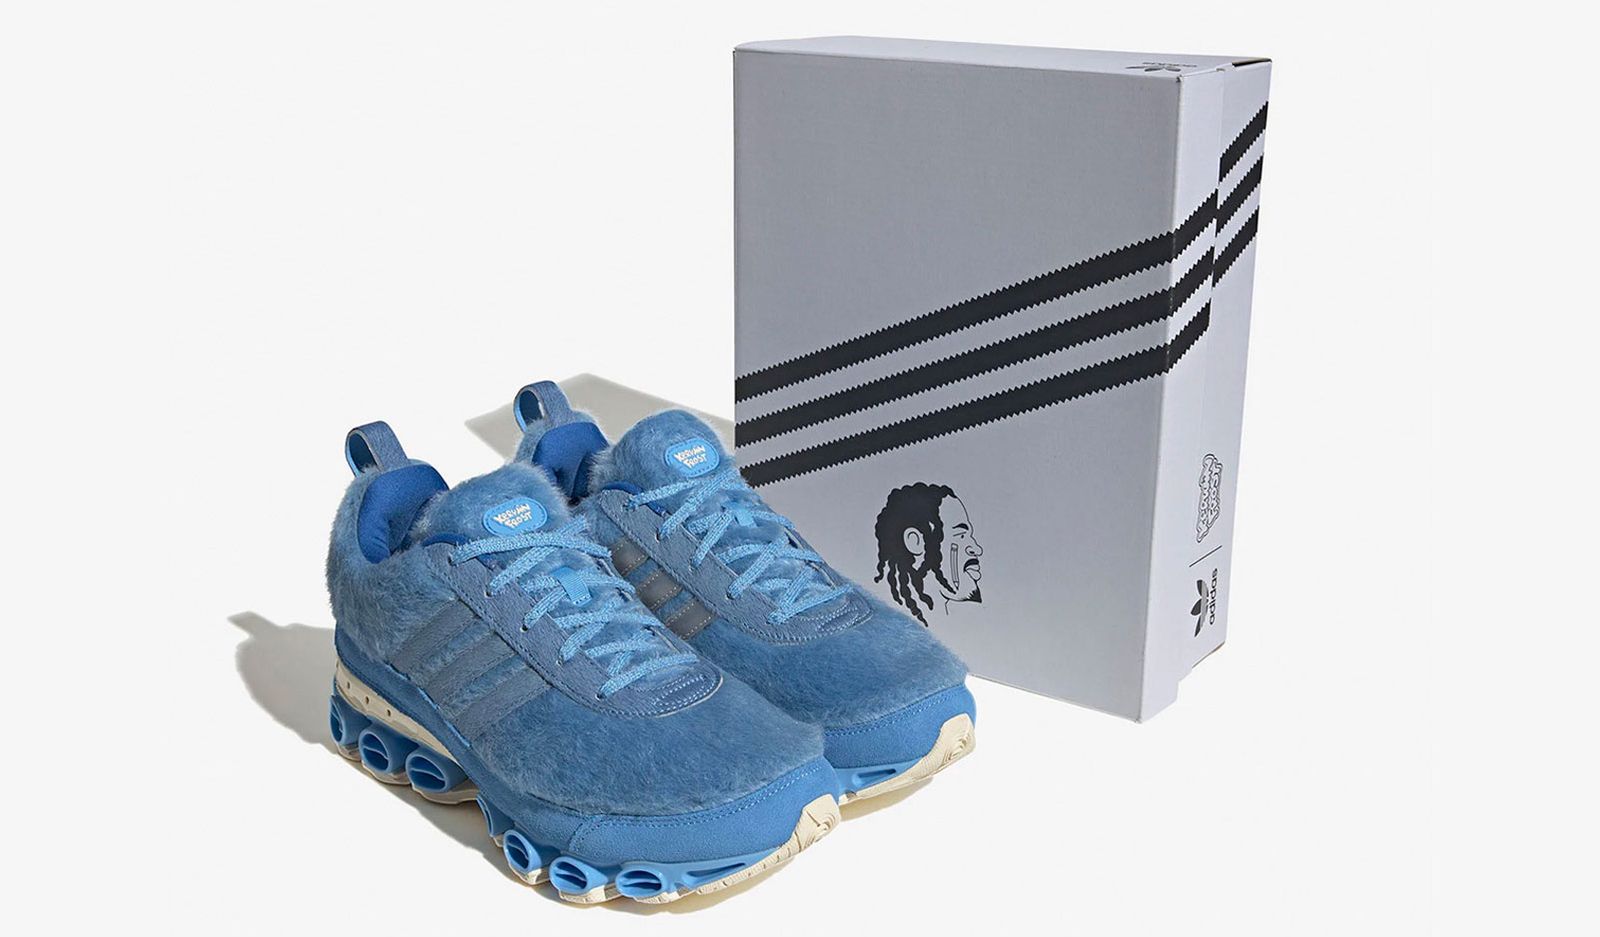 Kerwin Frost x adidas Microbounce T1 product image of a pair of light blue, faux fur sneakers.